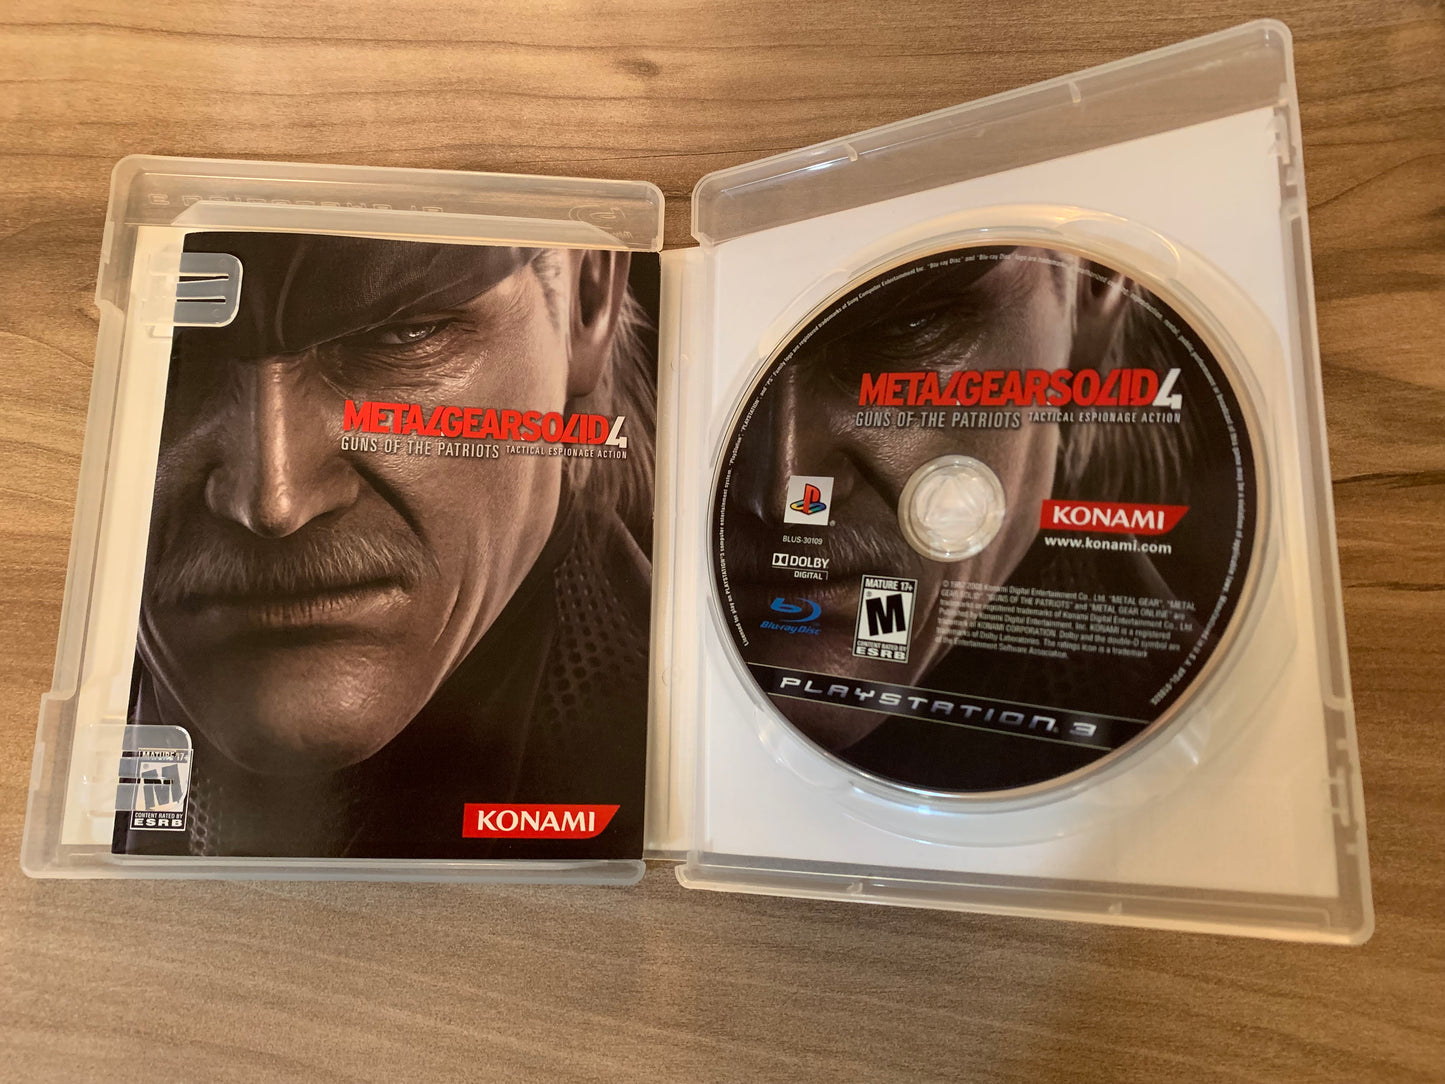 SONY PLAYSTATiON 3 [PS3] | METAL GEAR SOLiD 4 GUNS OF THE PATRiOTS